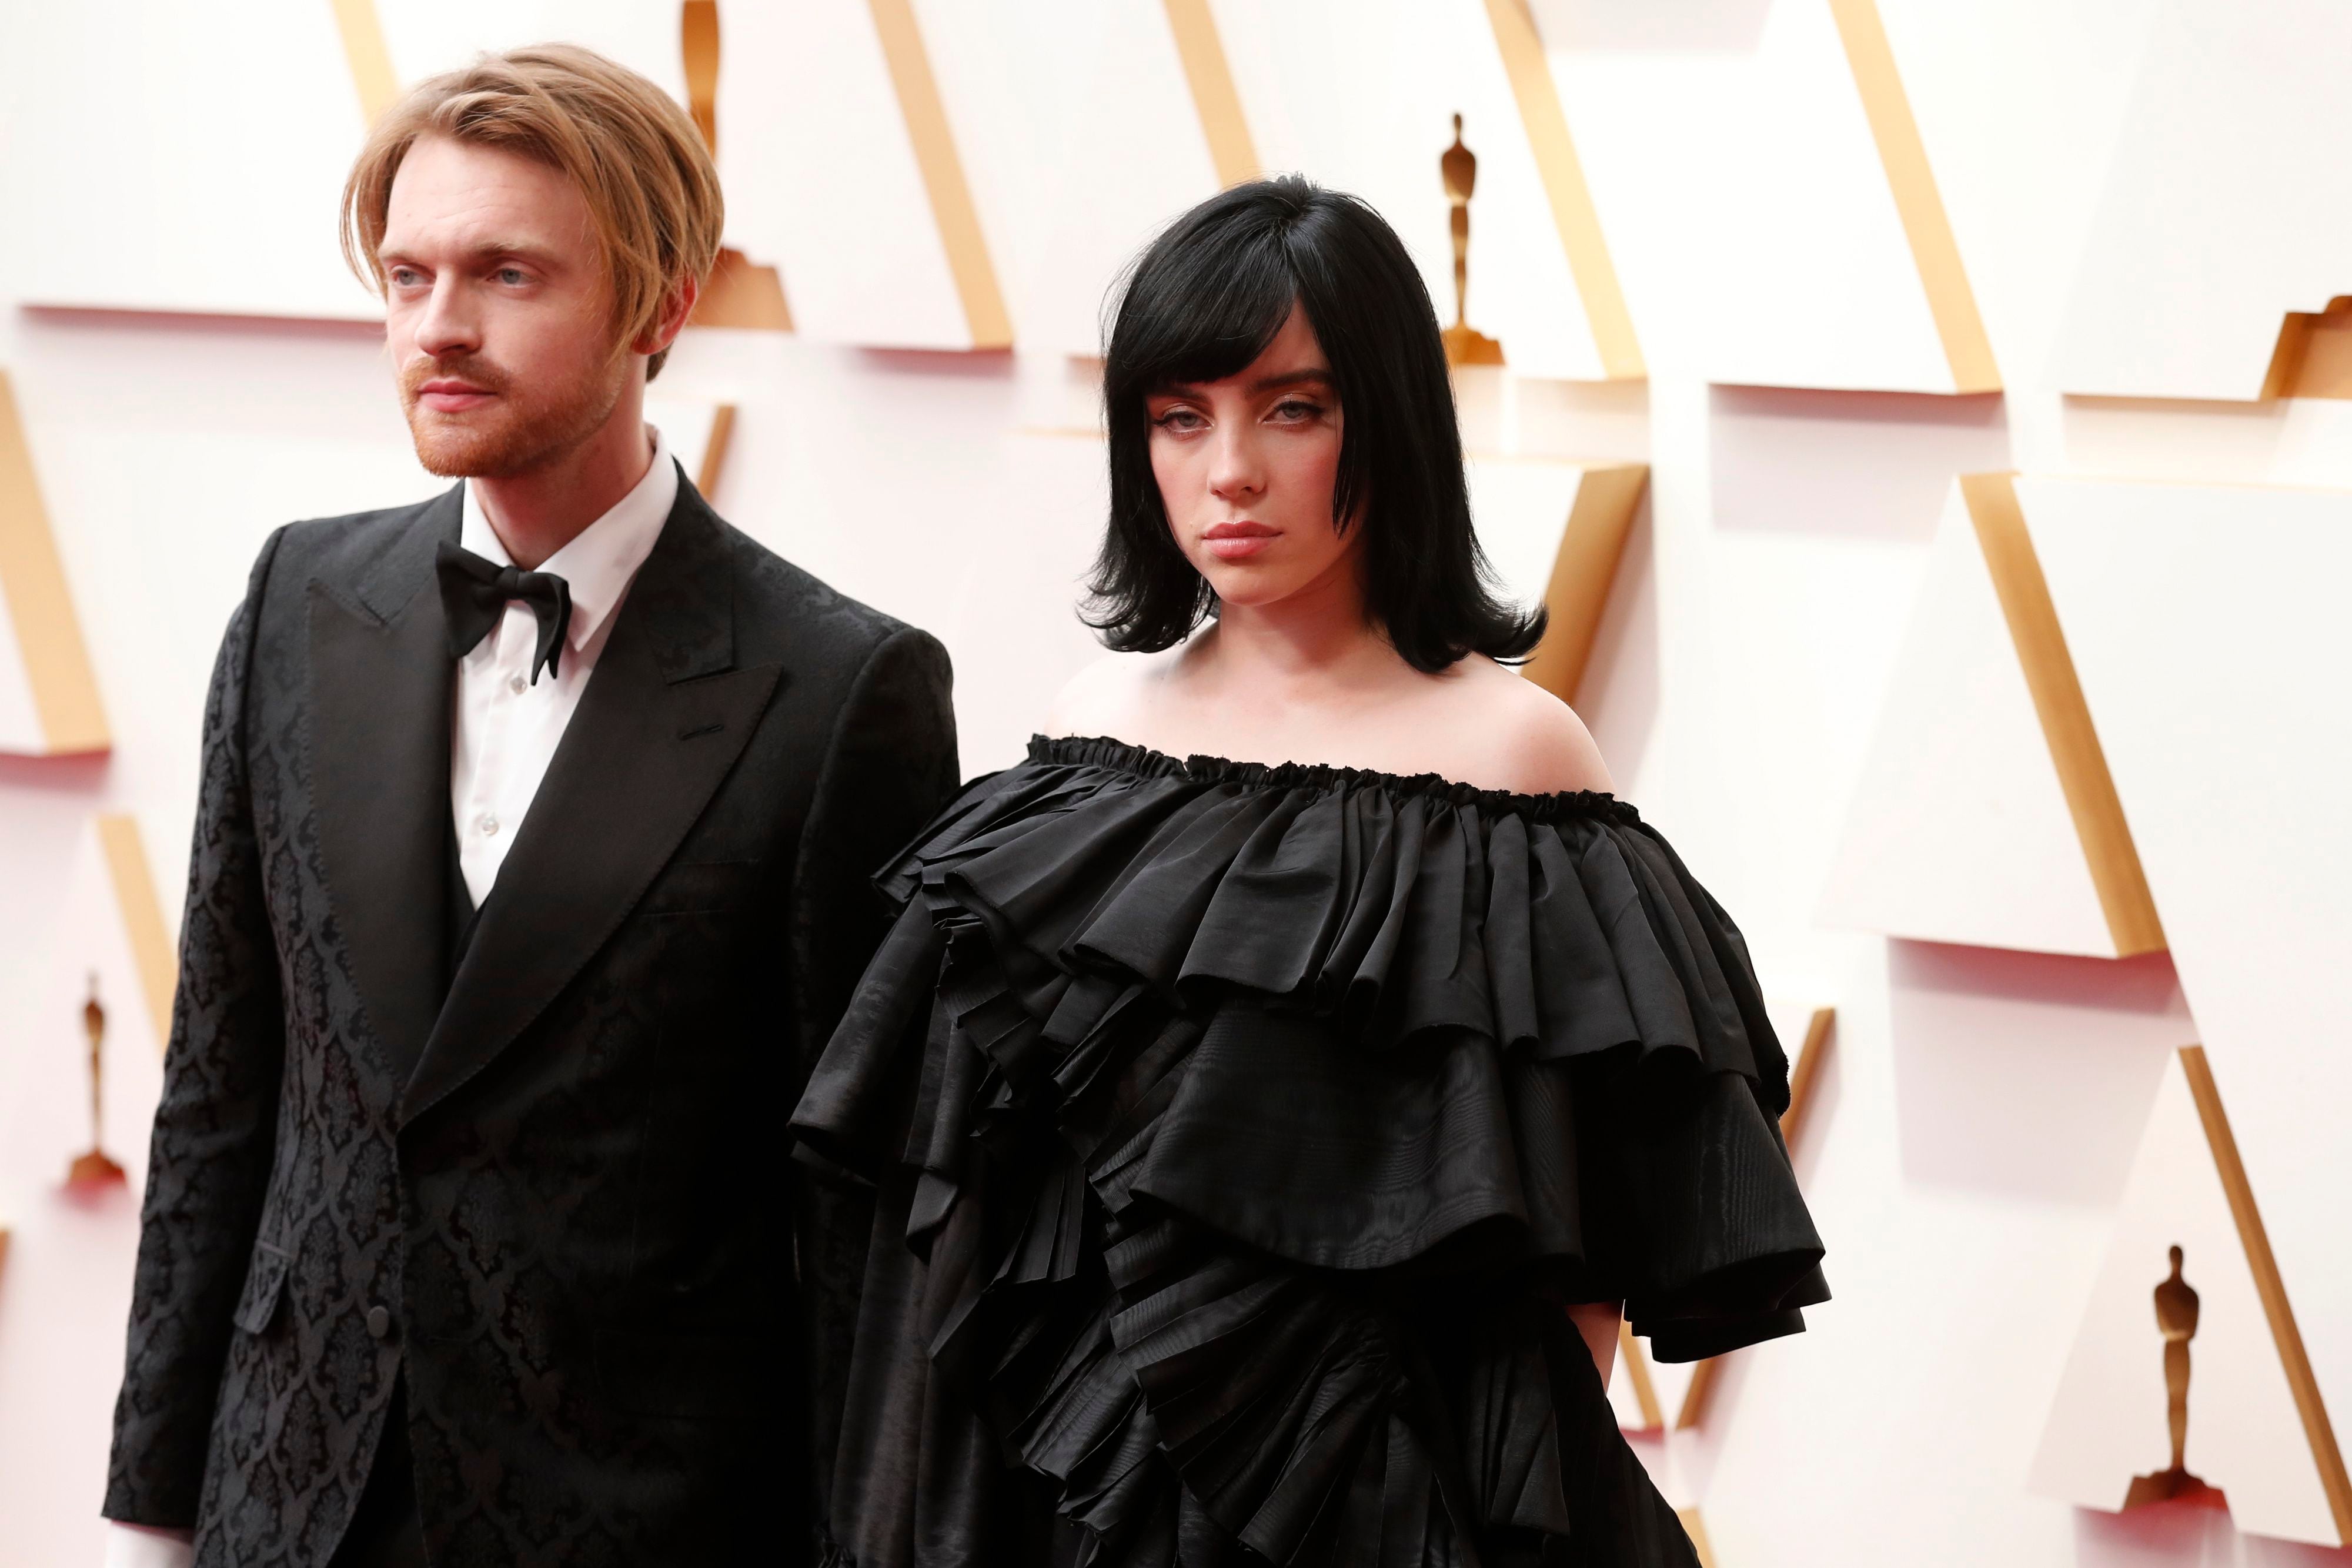 Hollywood (United States), 27/03/2022.- Finneas (L) and Billie Eilish arrive for the 94th annual Academy Awards ceremony at the Dolby Theatre in Hollywood, Los Angeles, California, USA, 27 March 2022. The Oscars are presented for outstanding individual or collective efforts in filmmaking in 24 categories. (Estados Unidos) EFE/EPA/DAVID SWANSON
